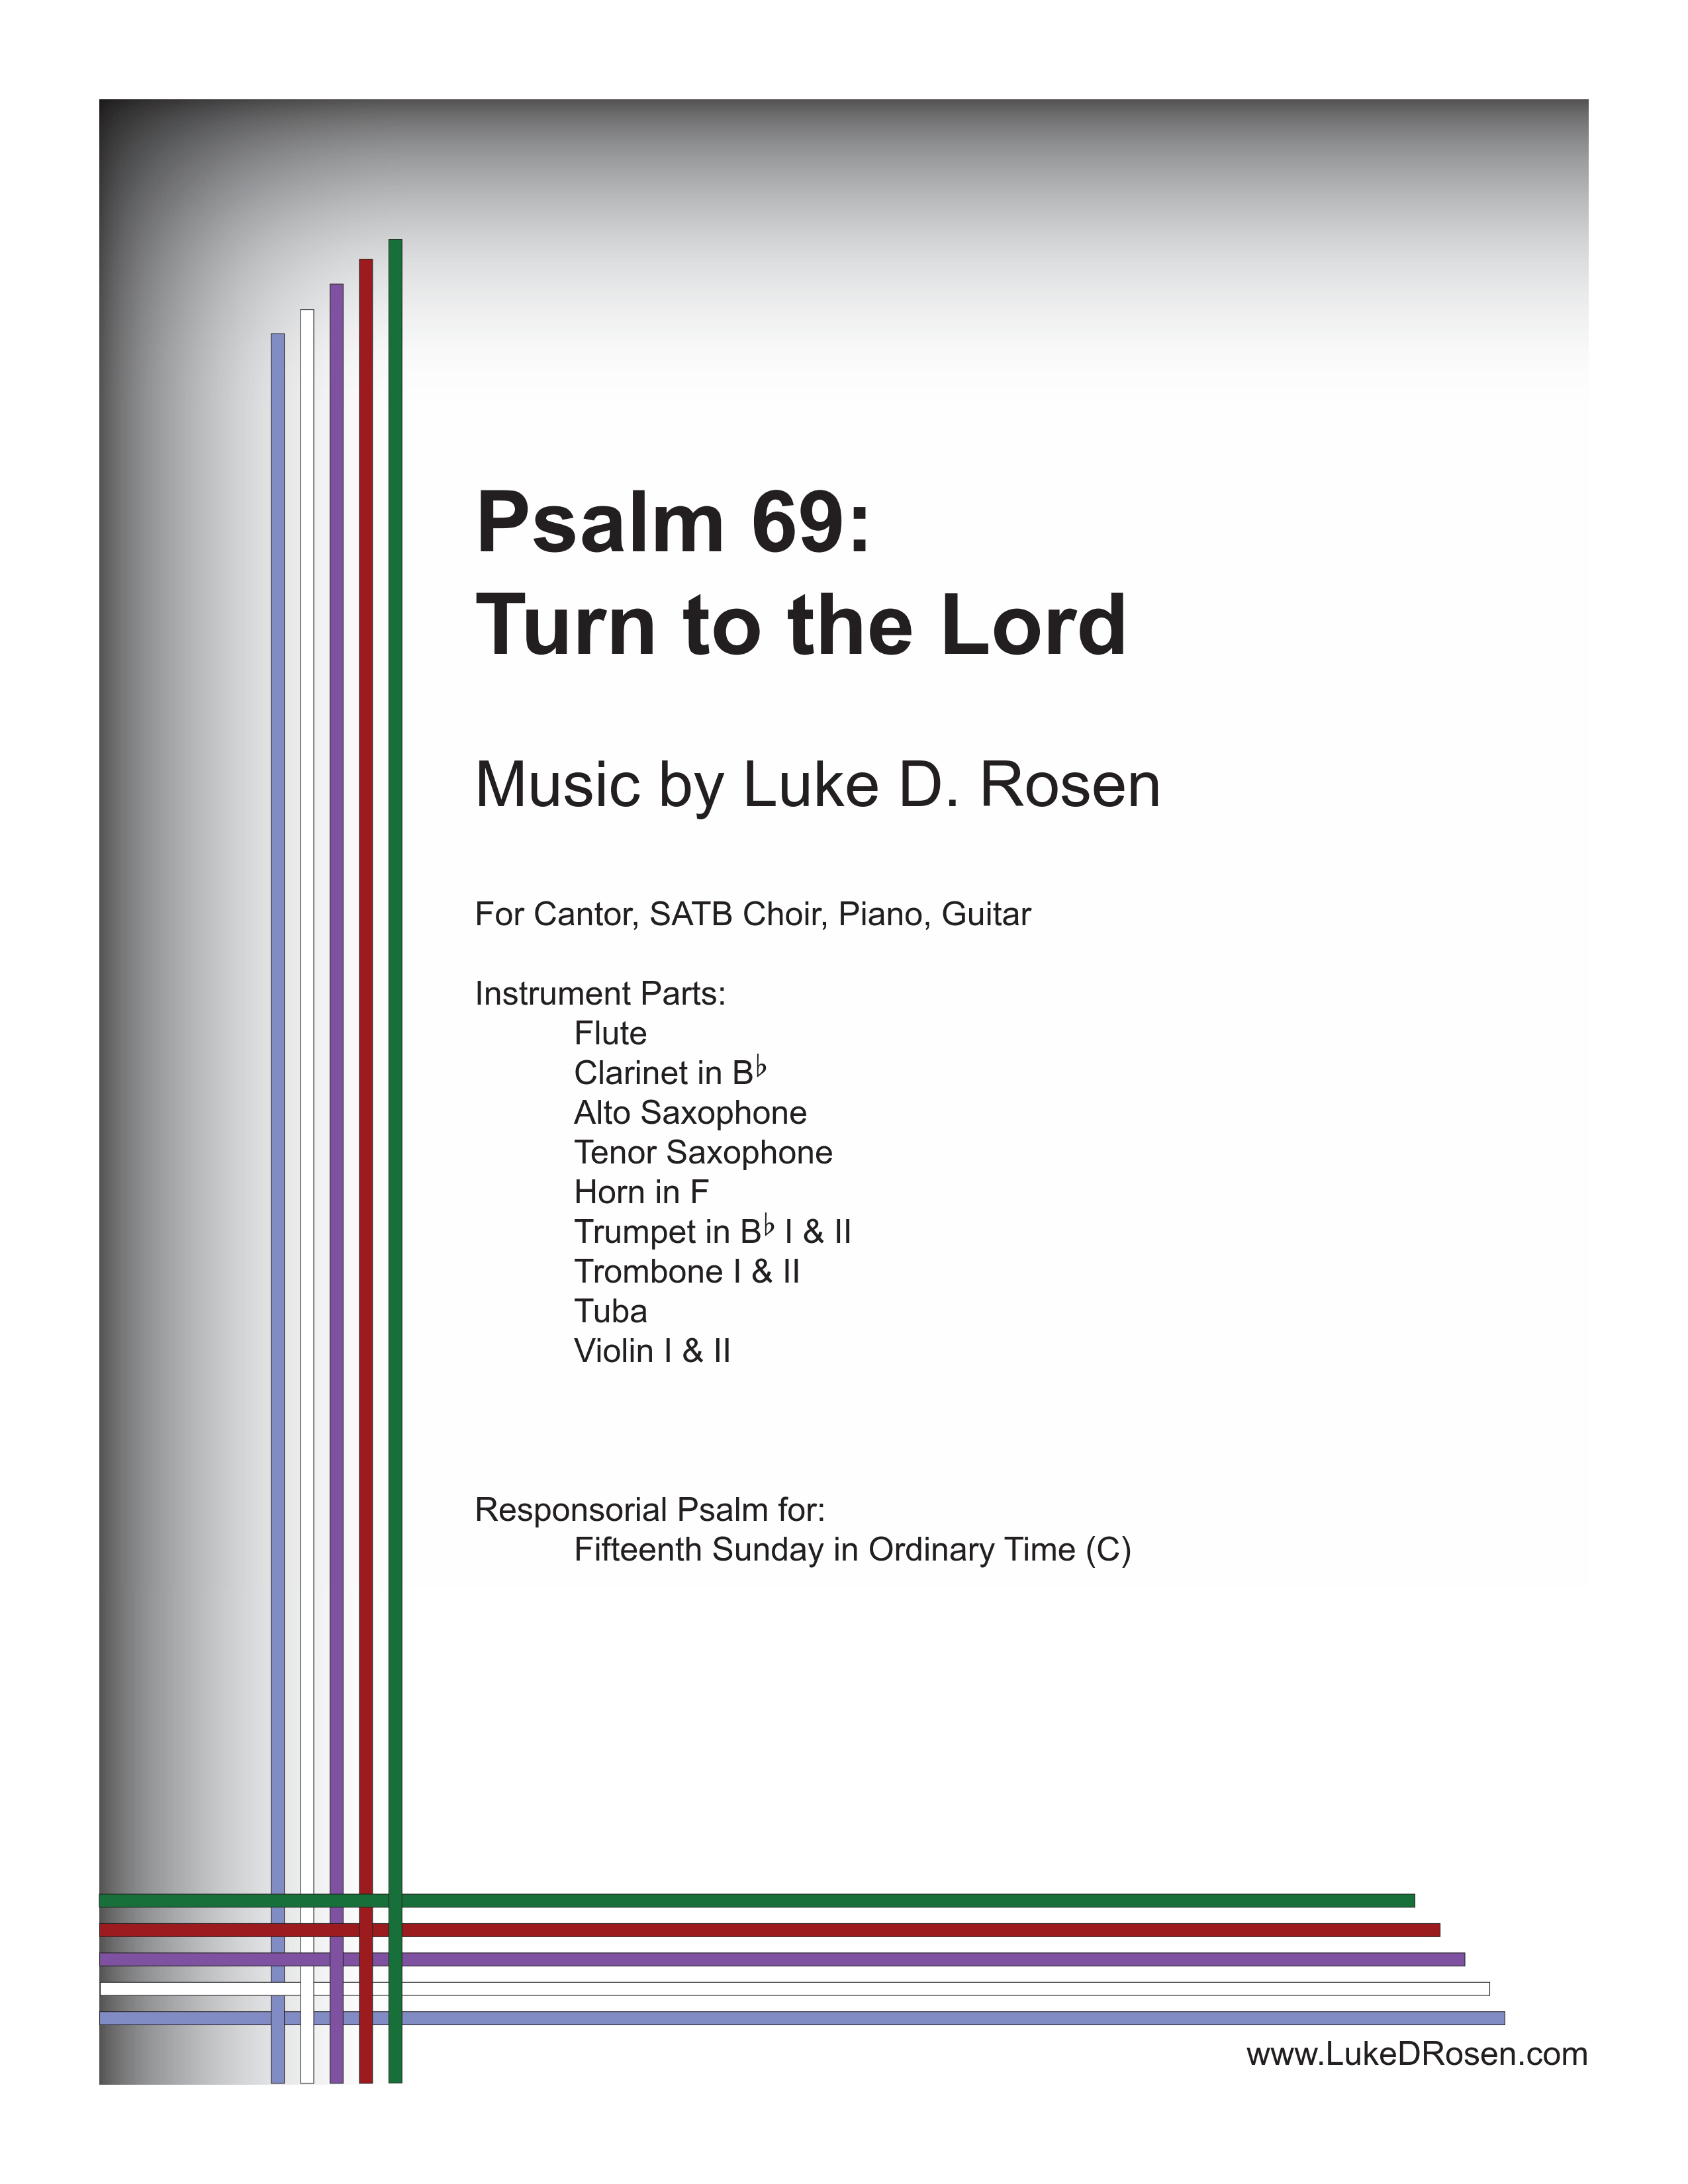 Psalm 69 – Turn to the Lord (Rosen)